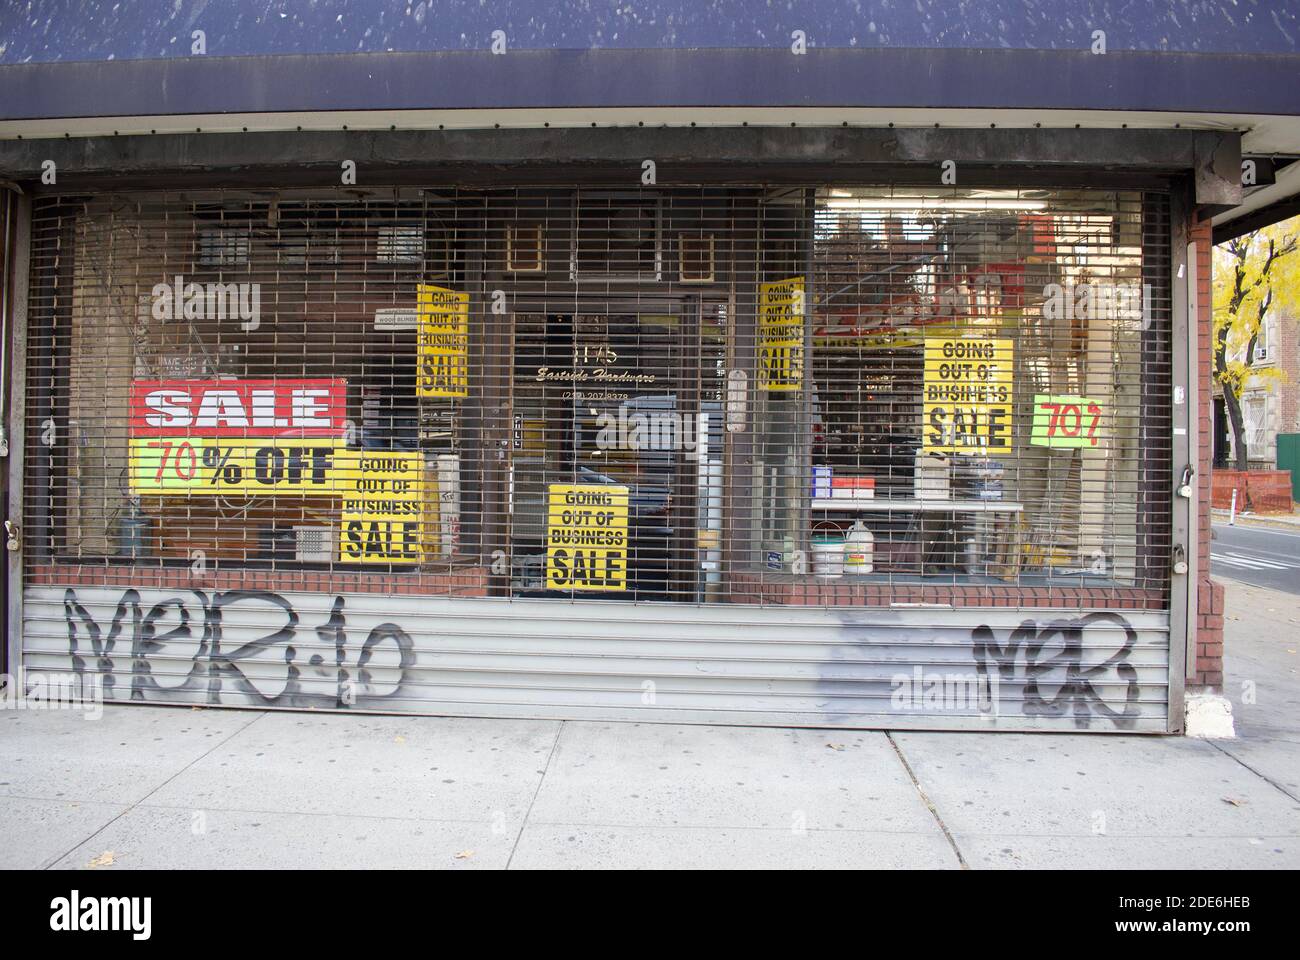 Going Out Of Business Sale 70% Off signs in a store window, November 29, 2020, in New York. Stock Photo